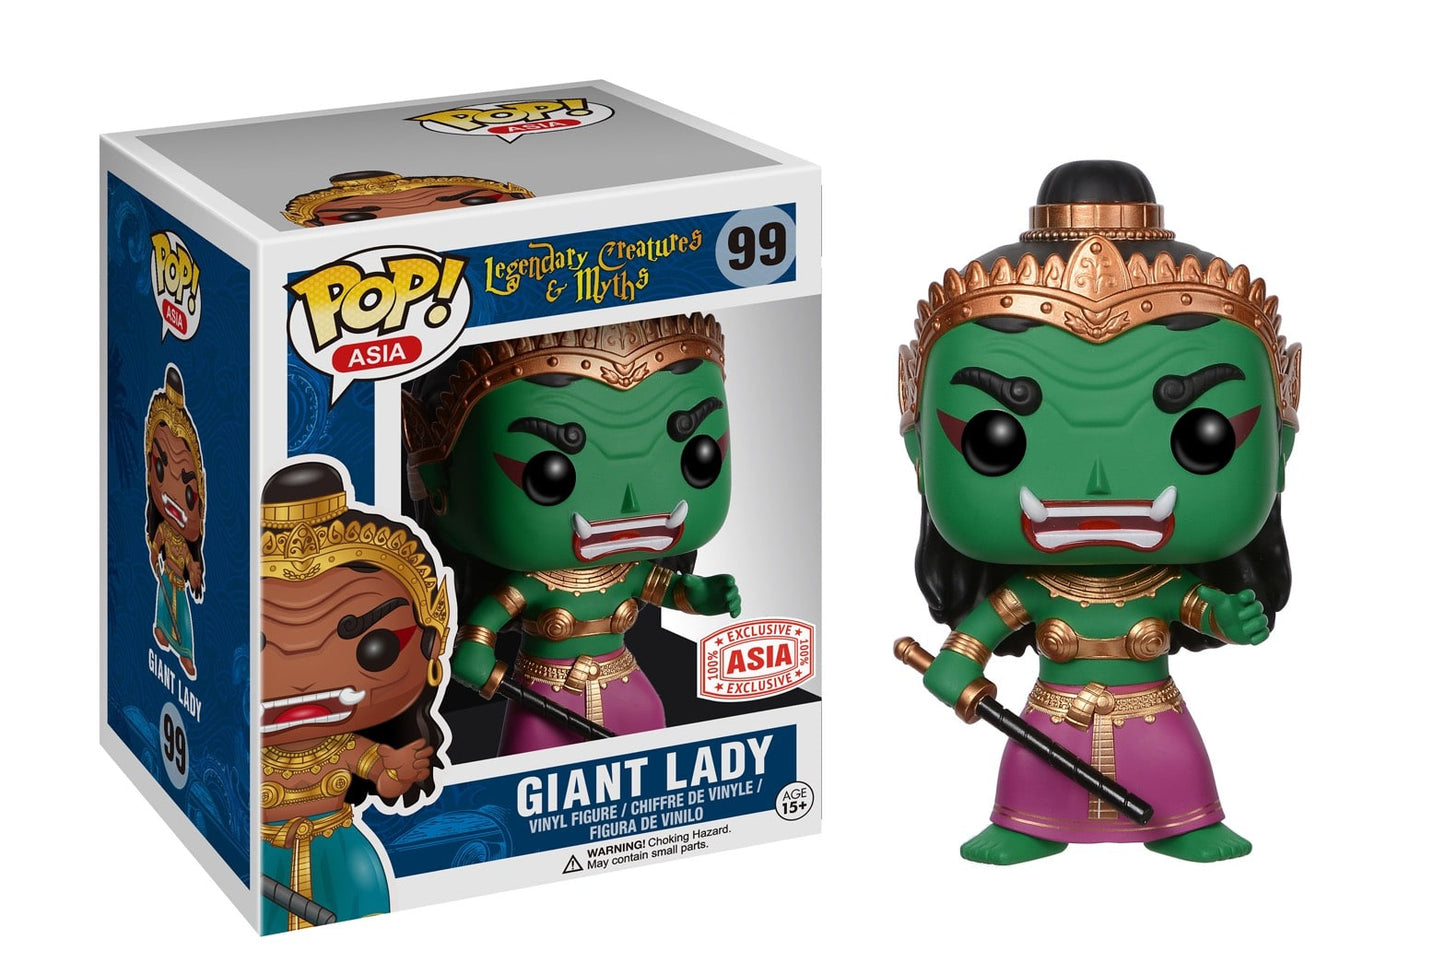 Funko POP! Asia Legendary Myths and Creatures Giant Lady #99 [Green] Exclusive